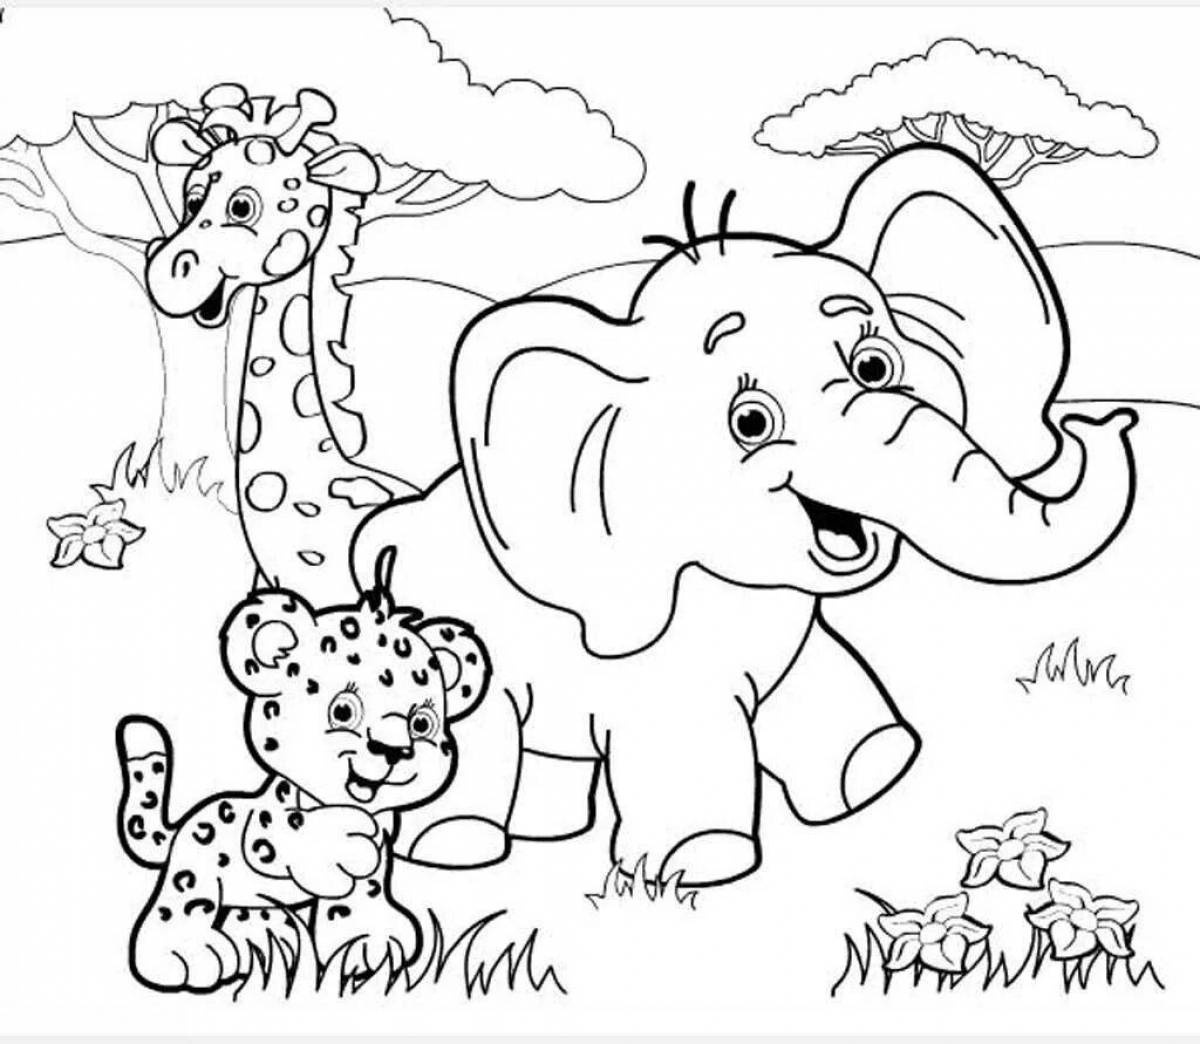 Witty coloring pages animals of hot countries for children 5 years old